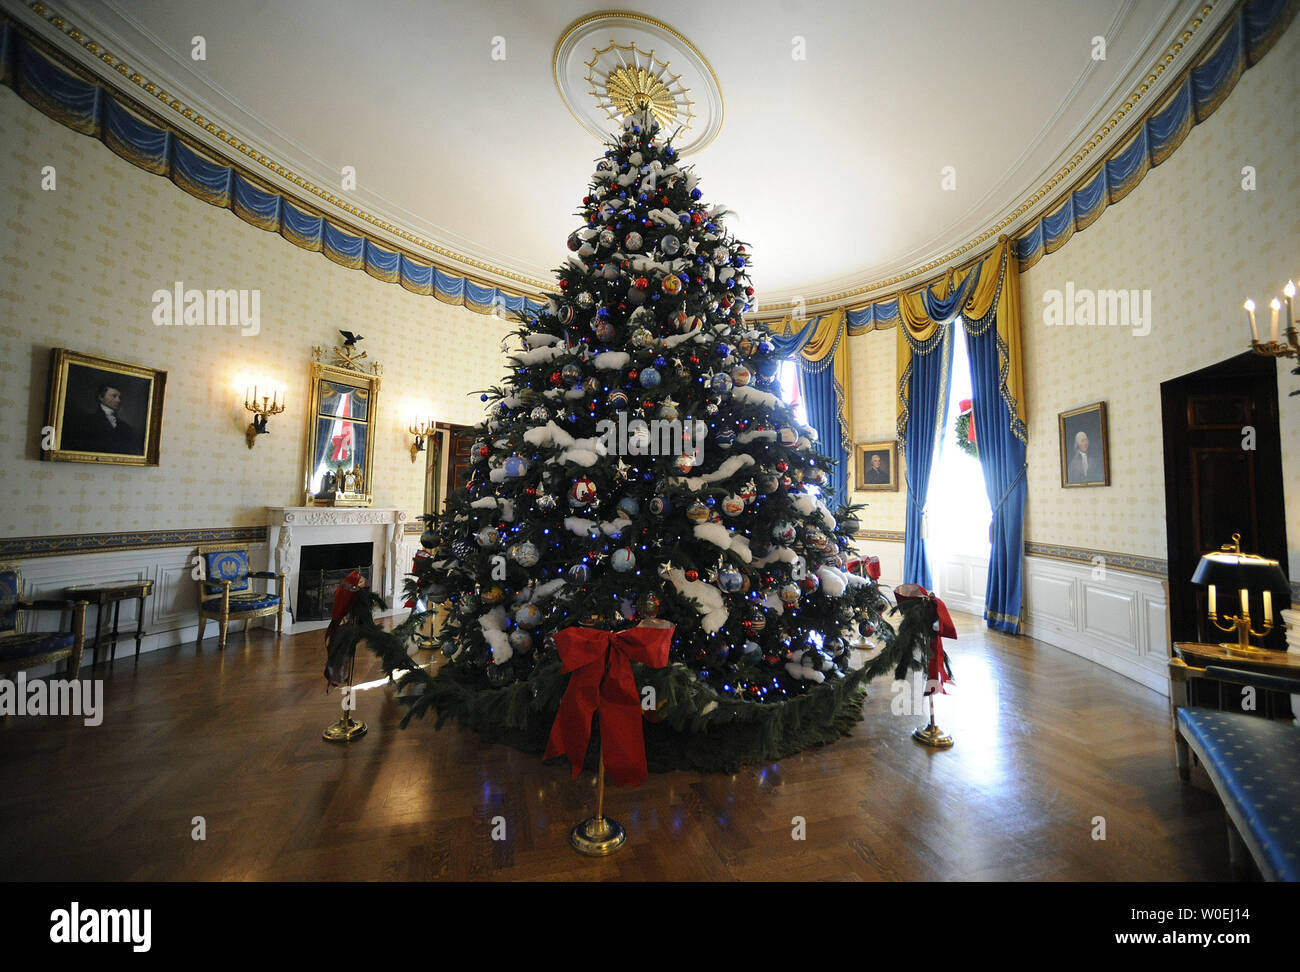 The 2008 White House Christmas tree is seen in the Blue Room of the White  House in Washington on December 3, 2008. The theme for this year's holiday  decorations in "A Red,